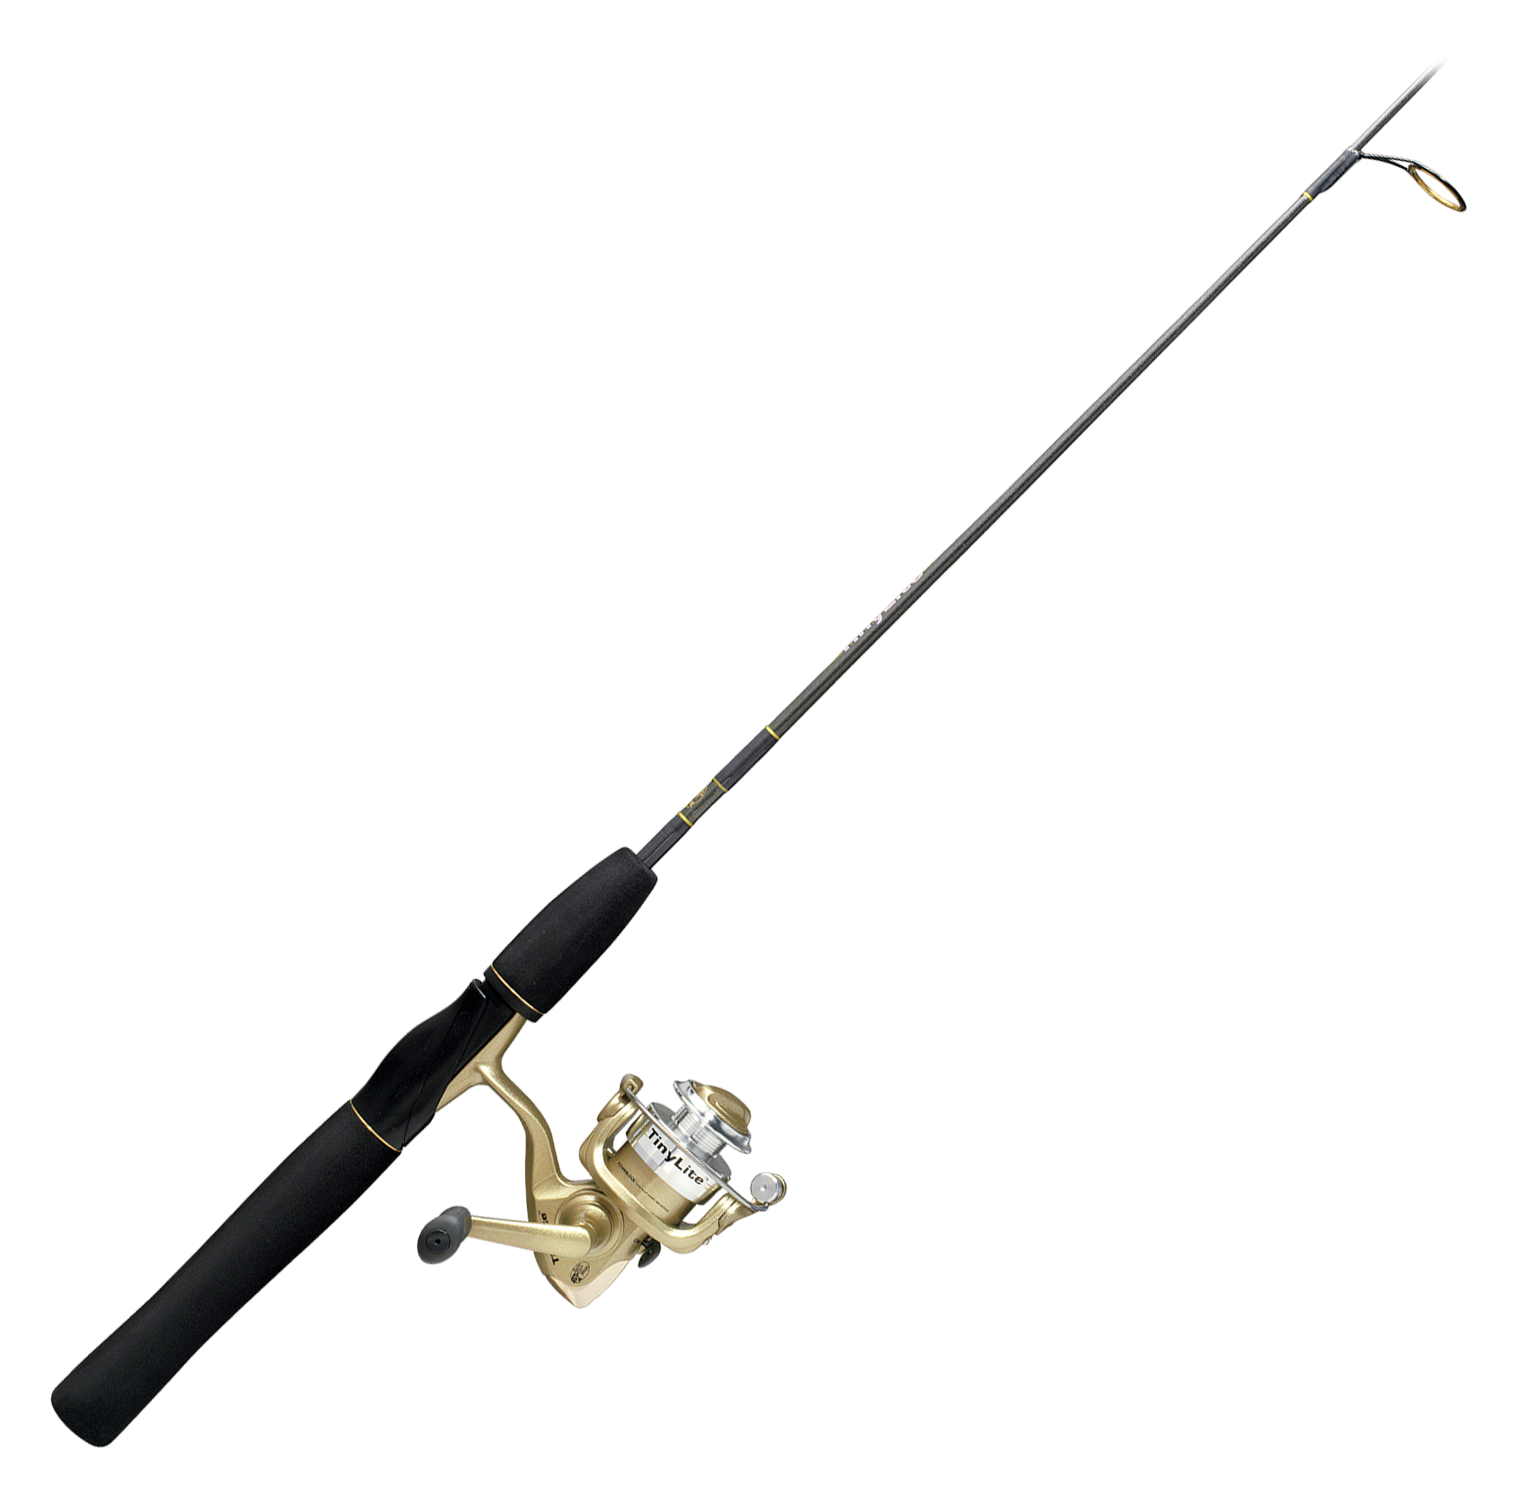 Bass Pro Shops TinyLite Trigger Spin Rod and Reel Combo